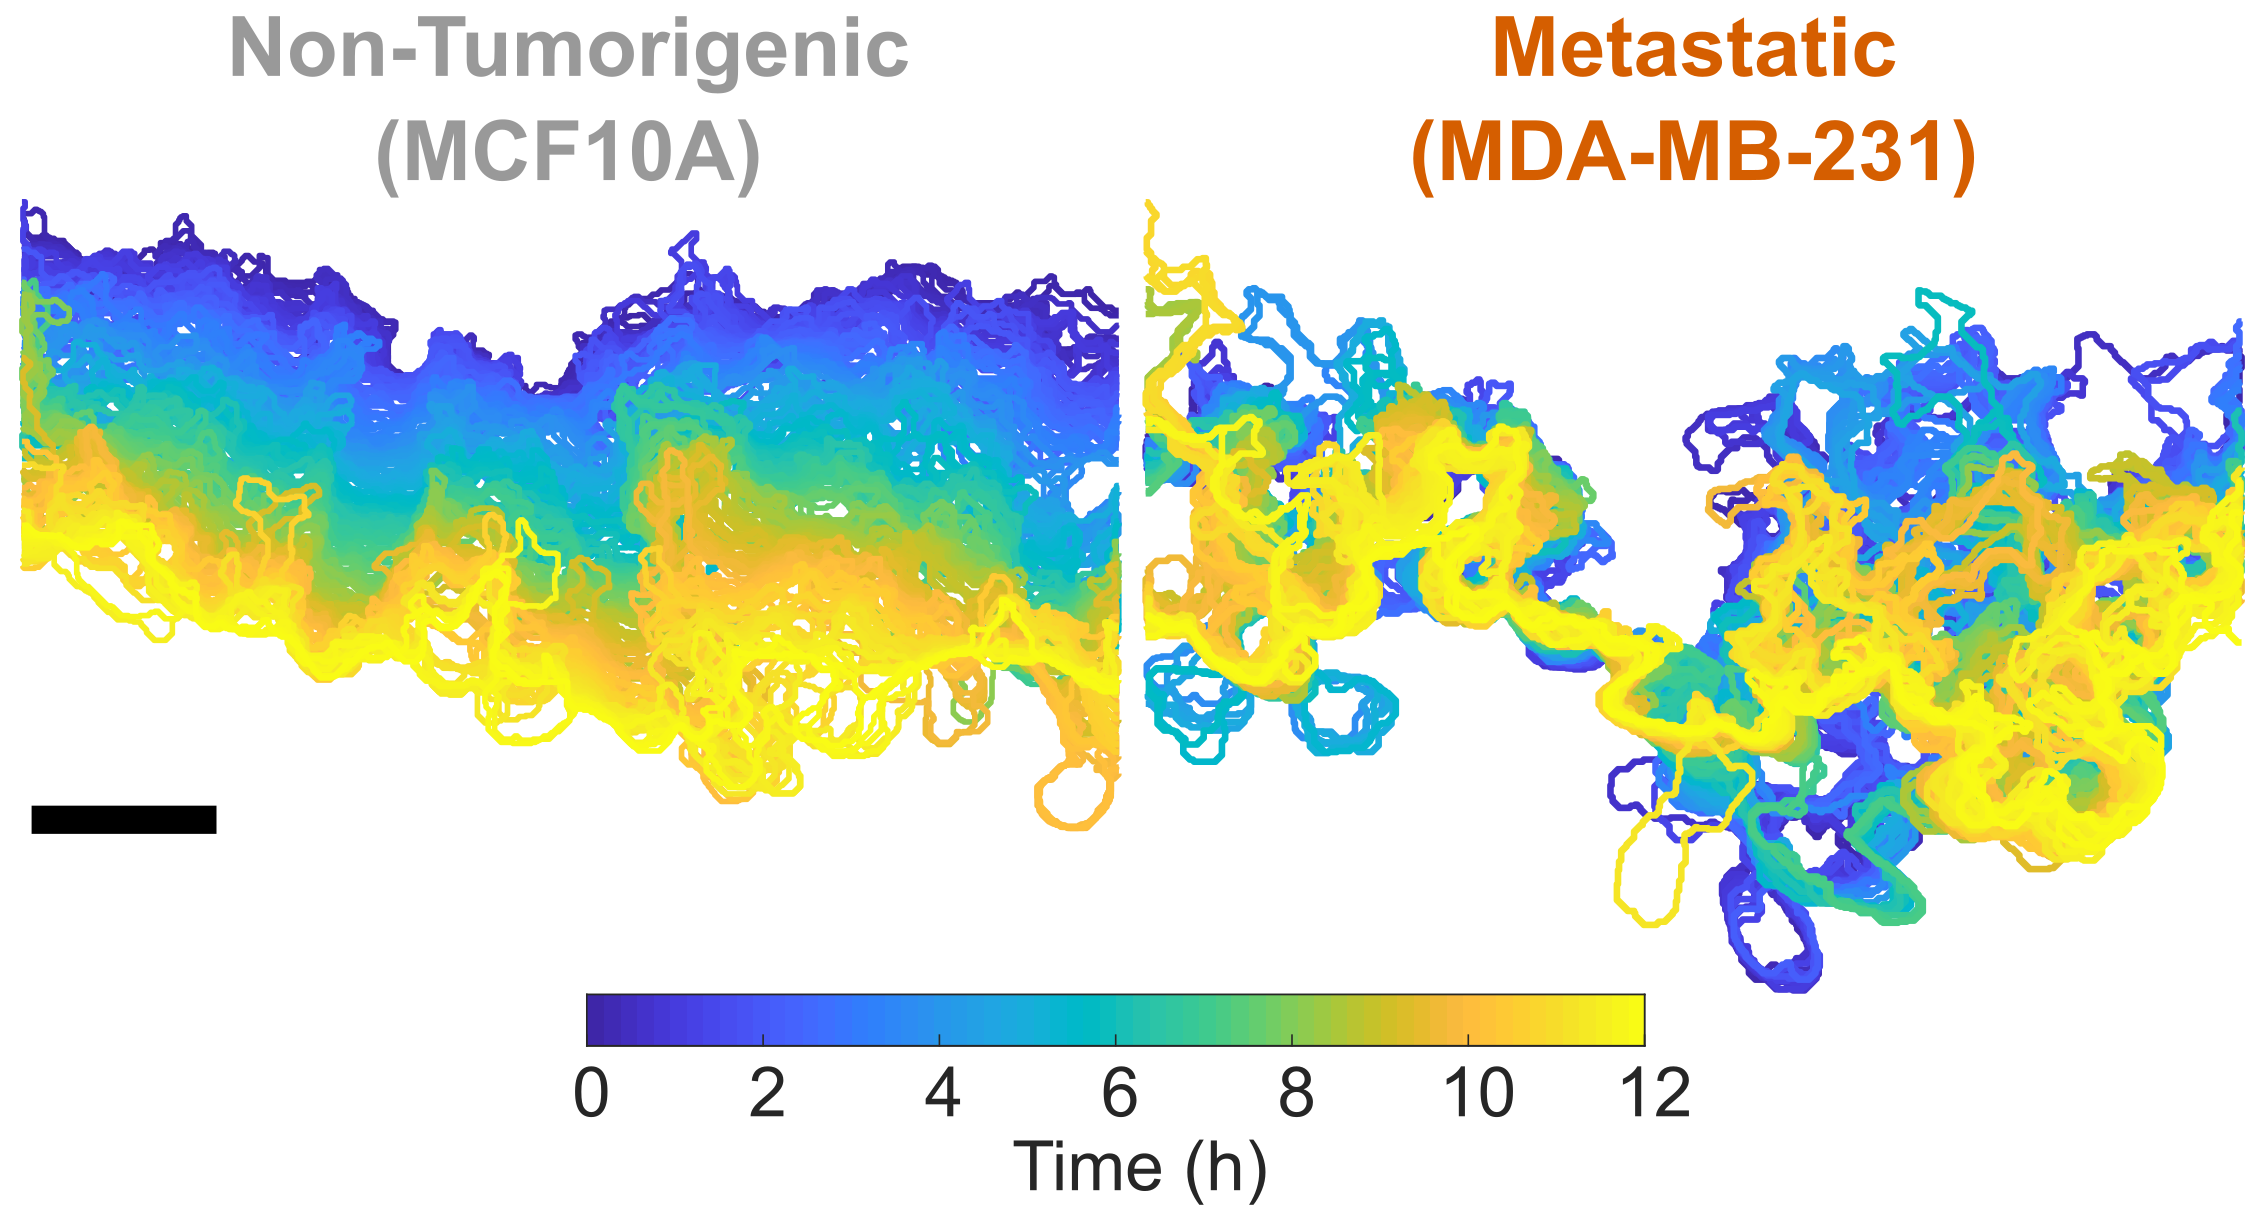 Segmented leading edges of a migrating cell sheet for non-tumorigenic MCF10A (top) and metastatic MDA-MB-231 (bottom) colored by time